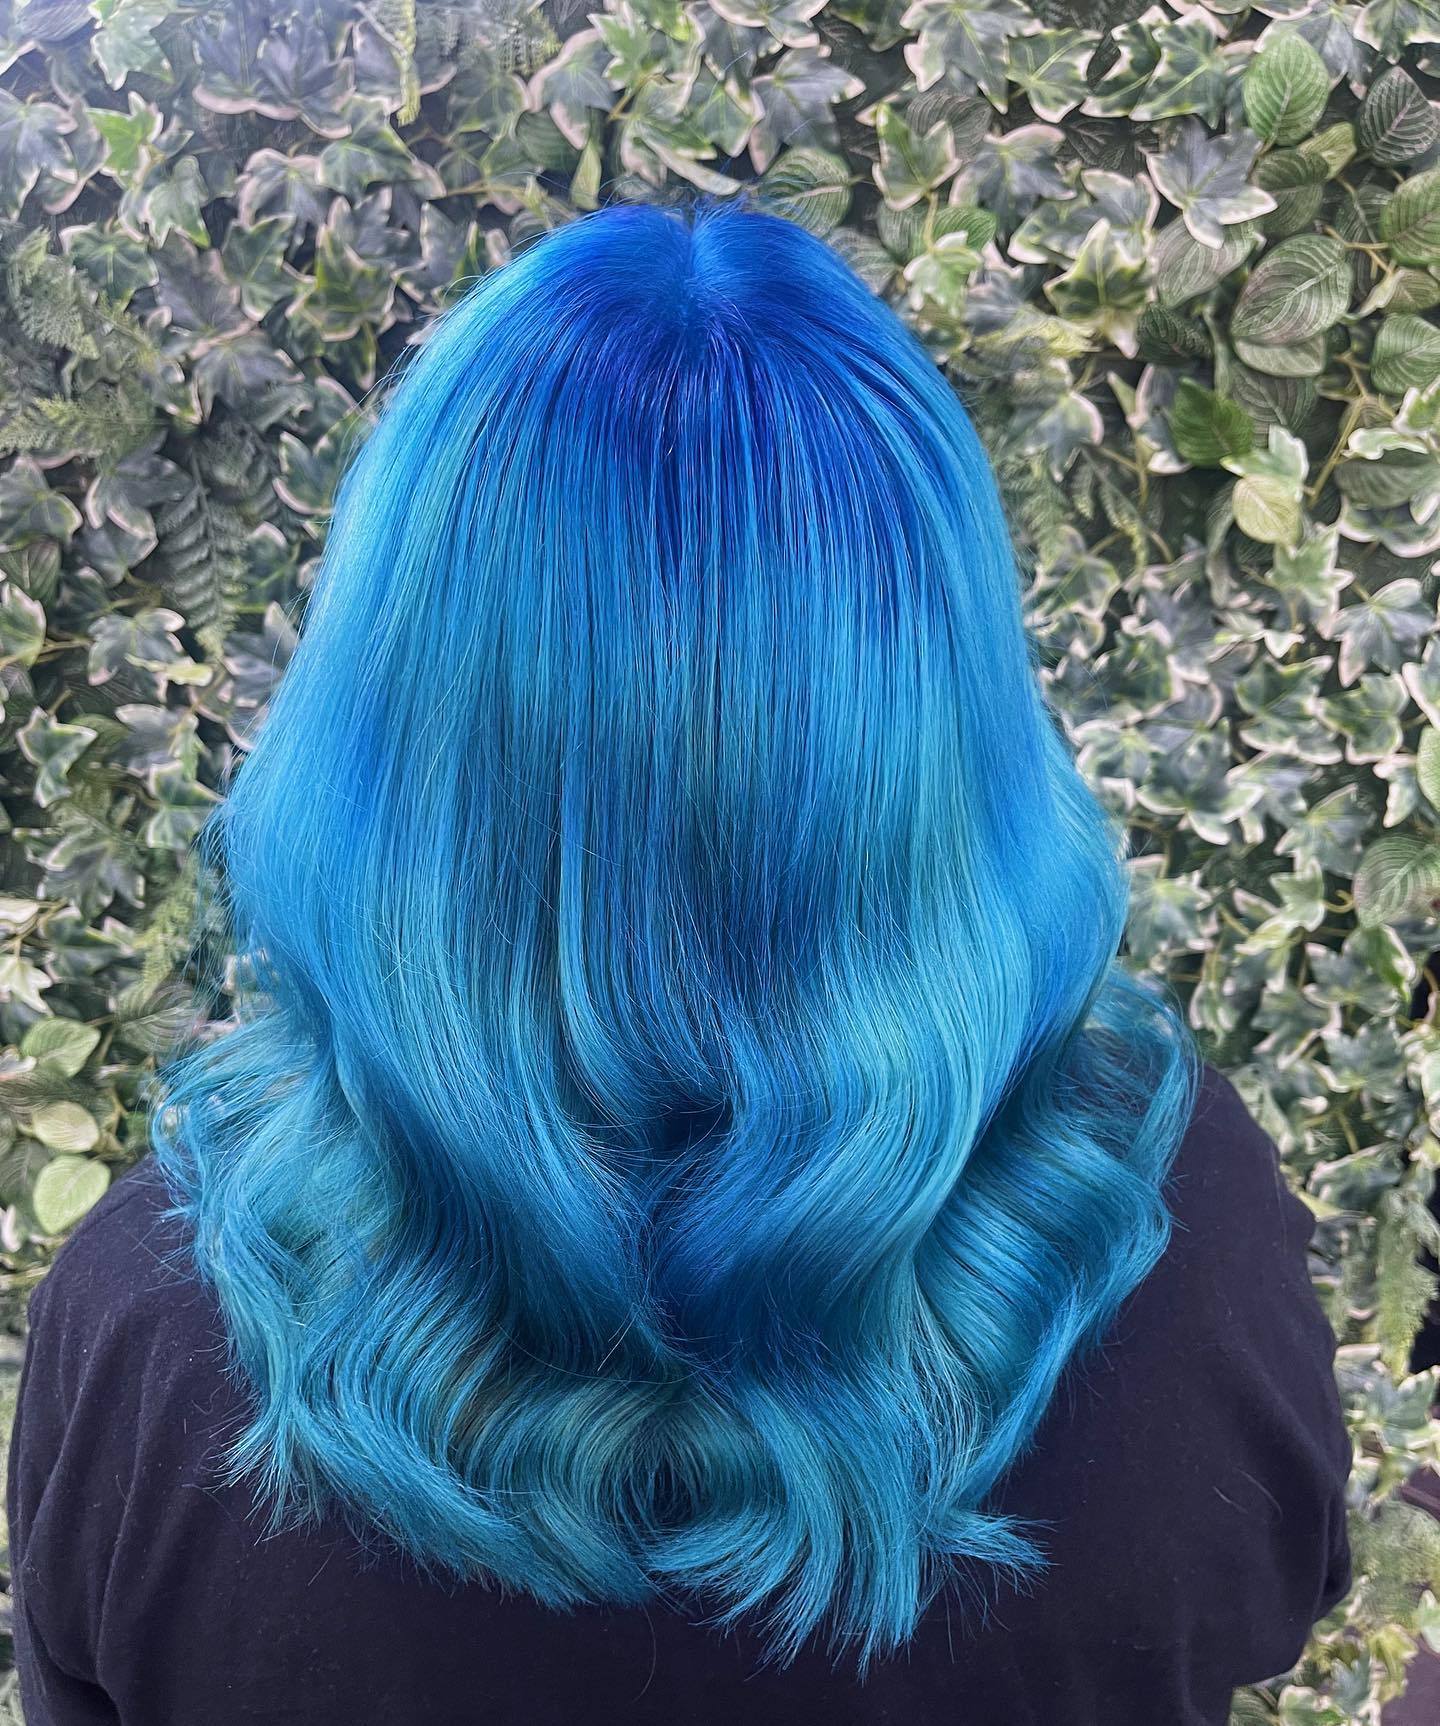 Hair Colour Transformations To Inspire Your Next Look